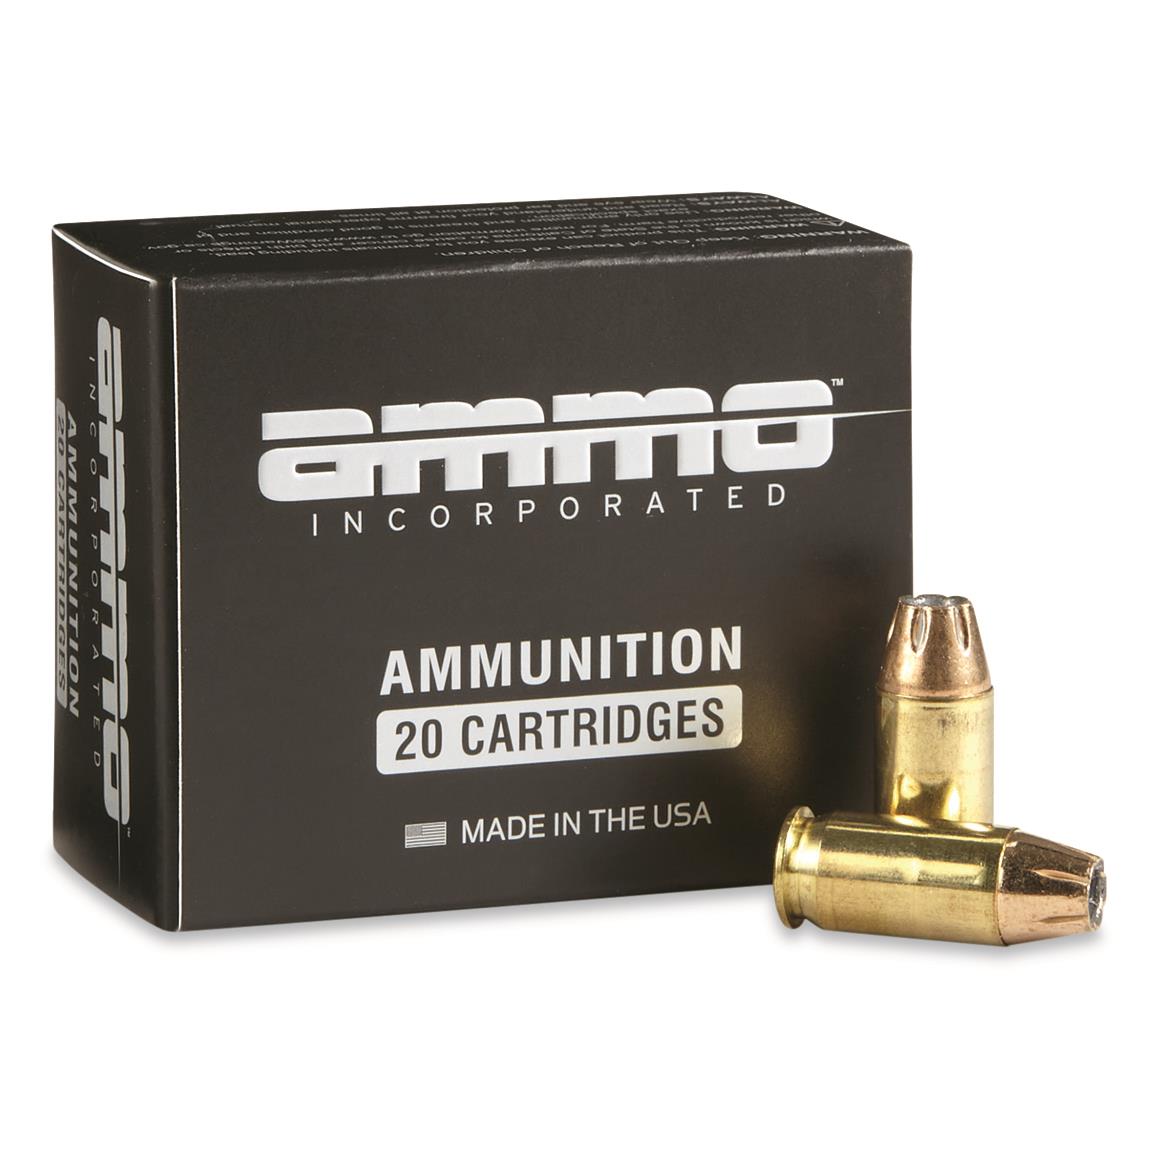 Ammo Inc. Signature, .45 ACP, Jacketed Hollow Point, 230 Grain, 20 Rounds